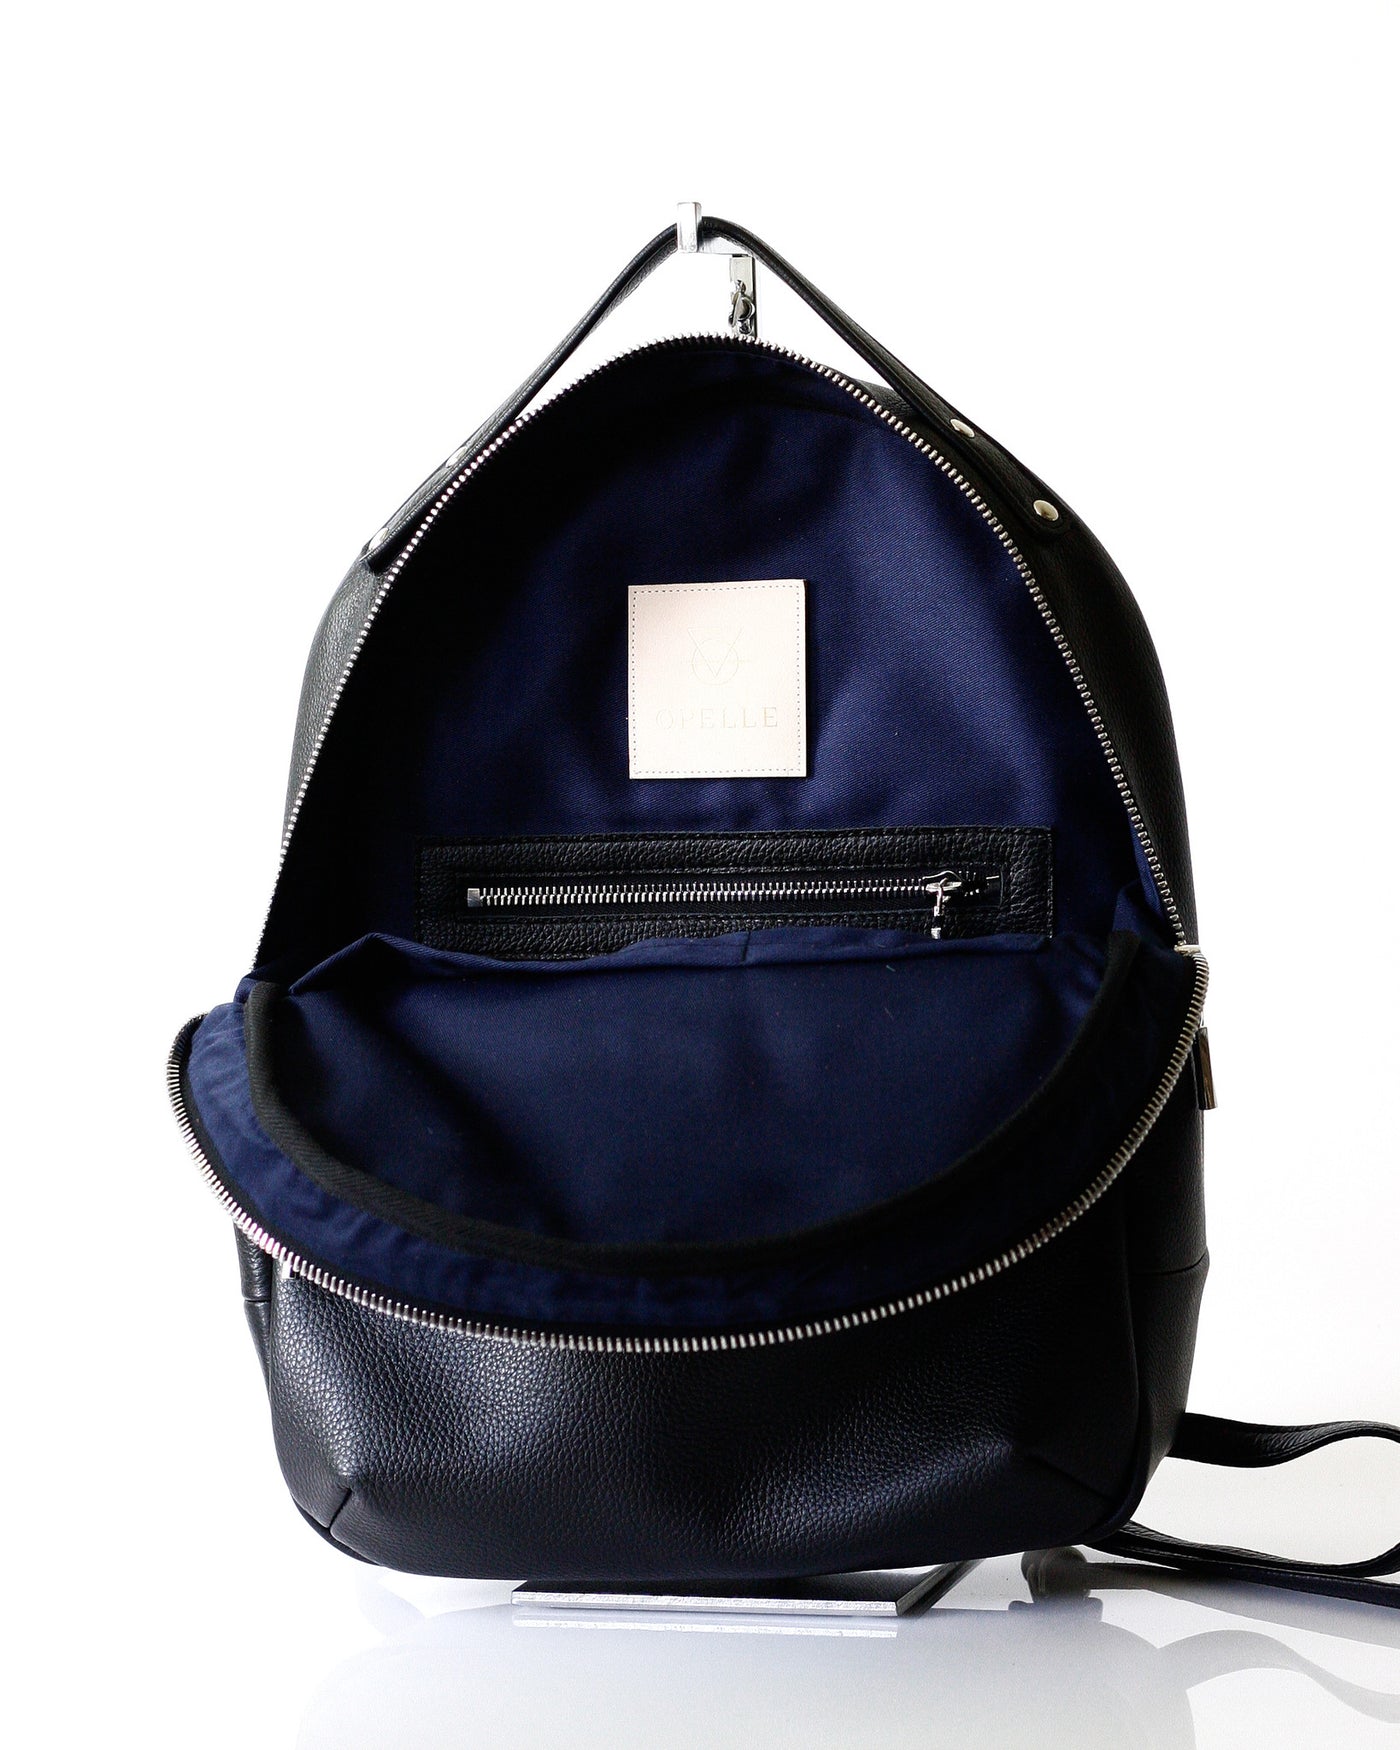 Kanye Backpack - Opelle bag Permanent Collection - Opelle leather handbag handcrafted leather bag toronto Canada